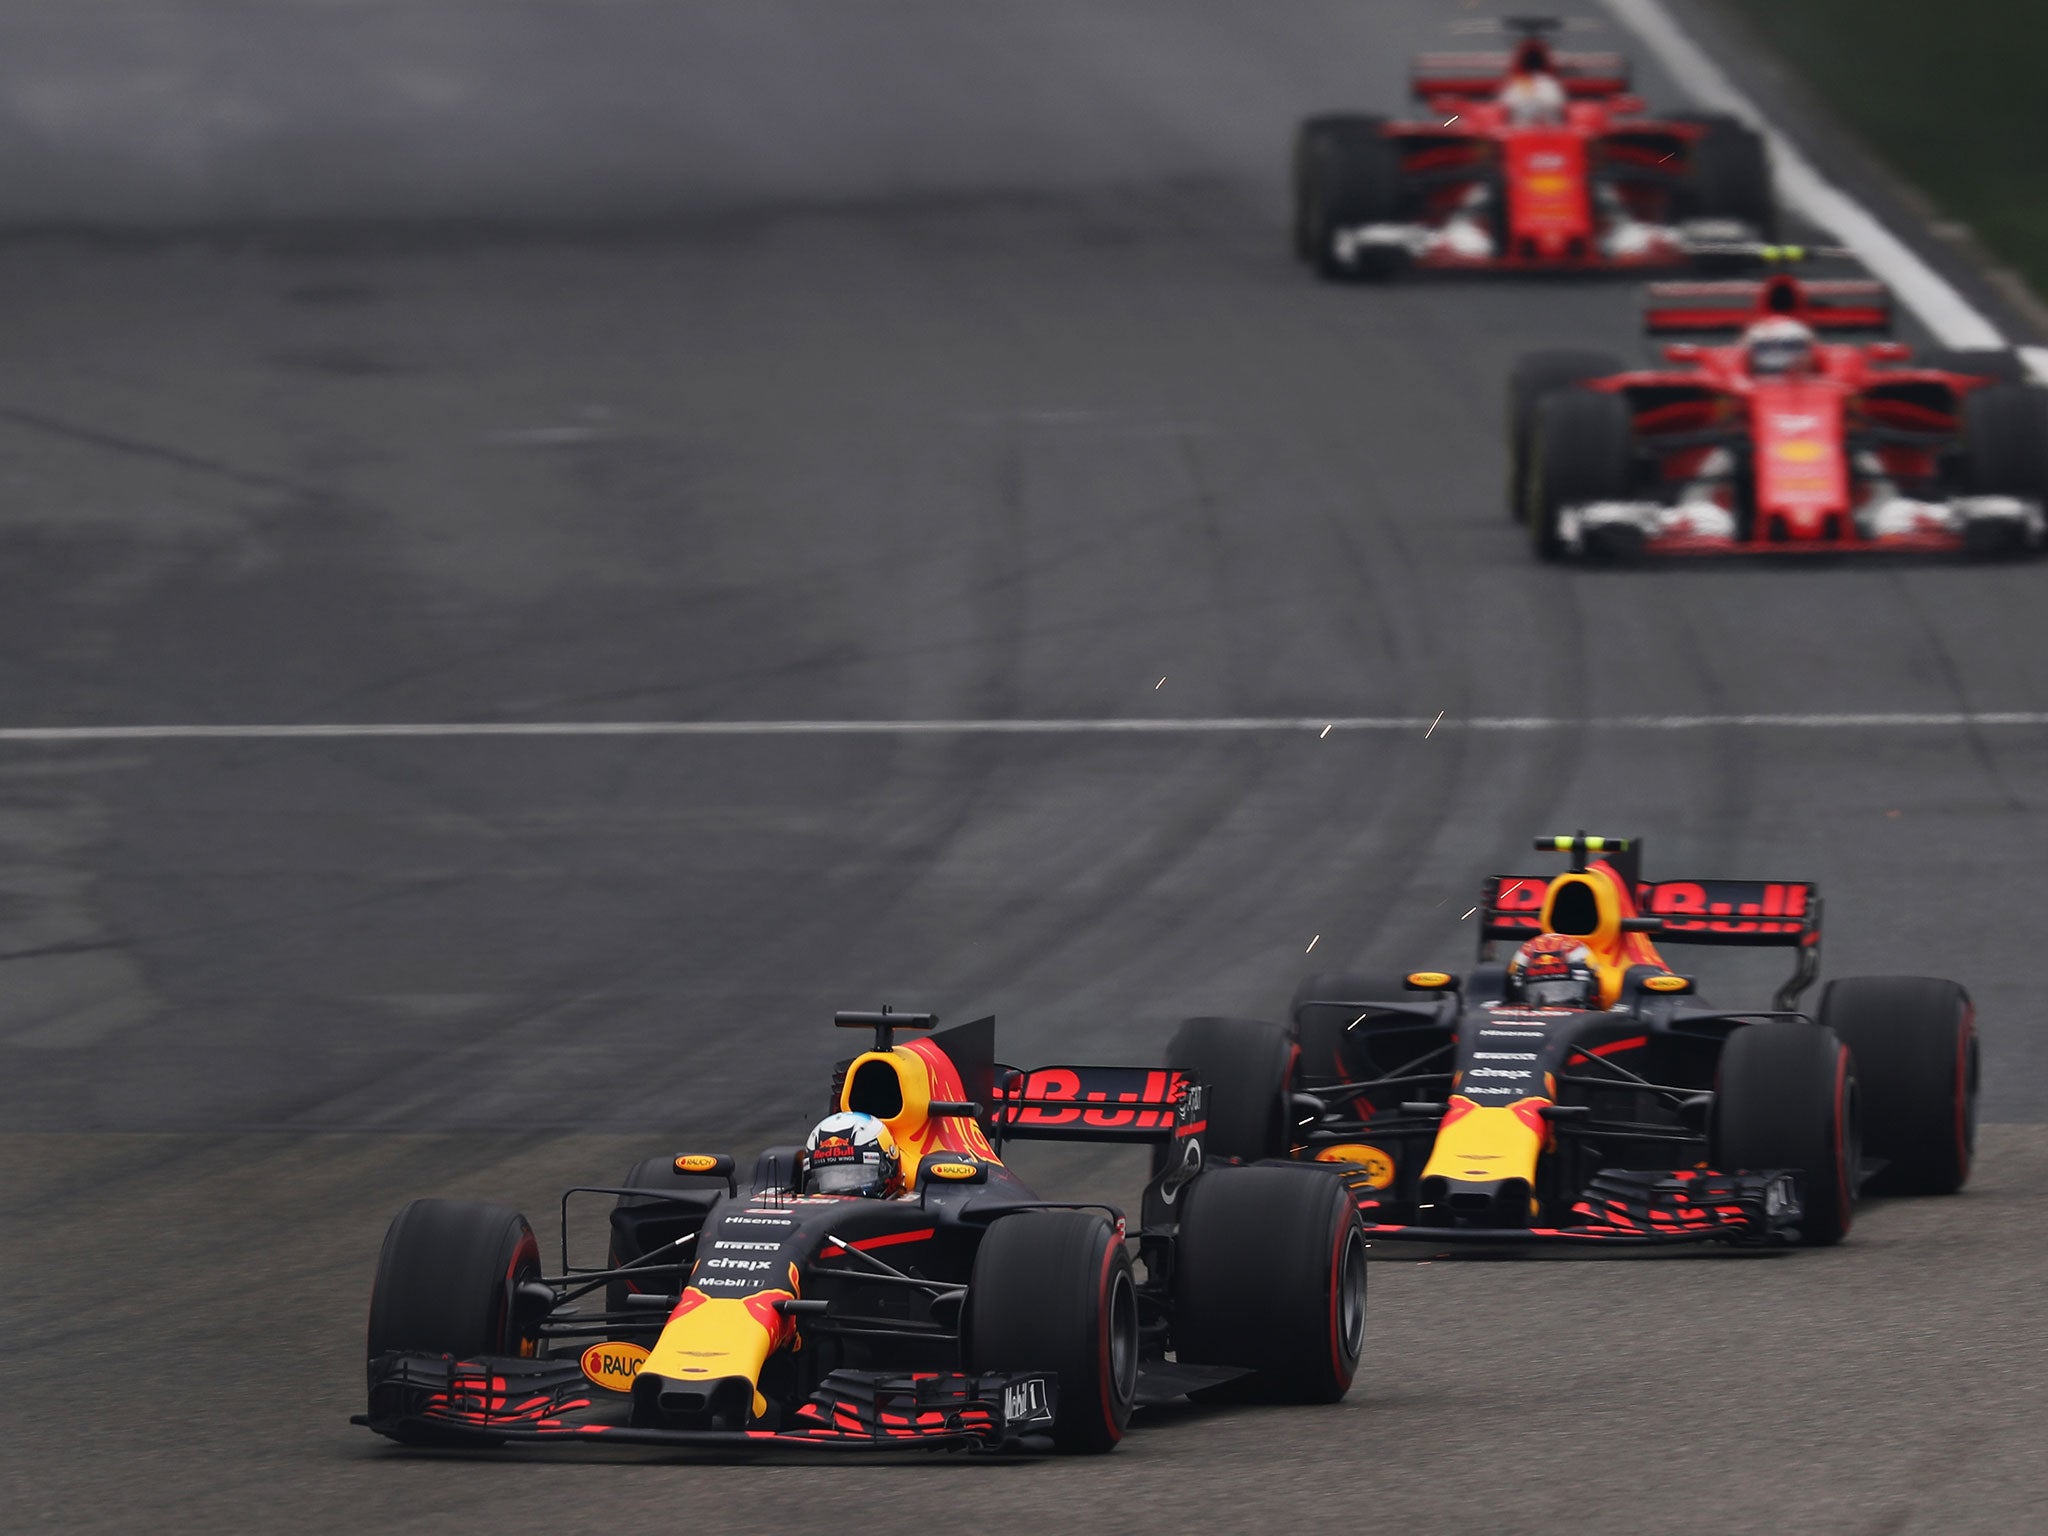 Max Verstappen was able to hold off Daniel Ricciardo in a late intra-Red Bull challenge